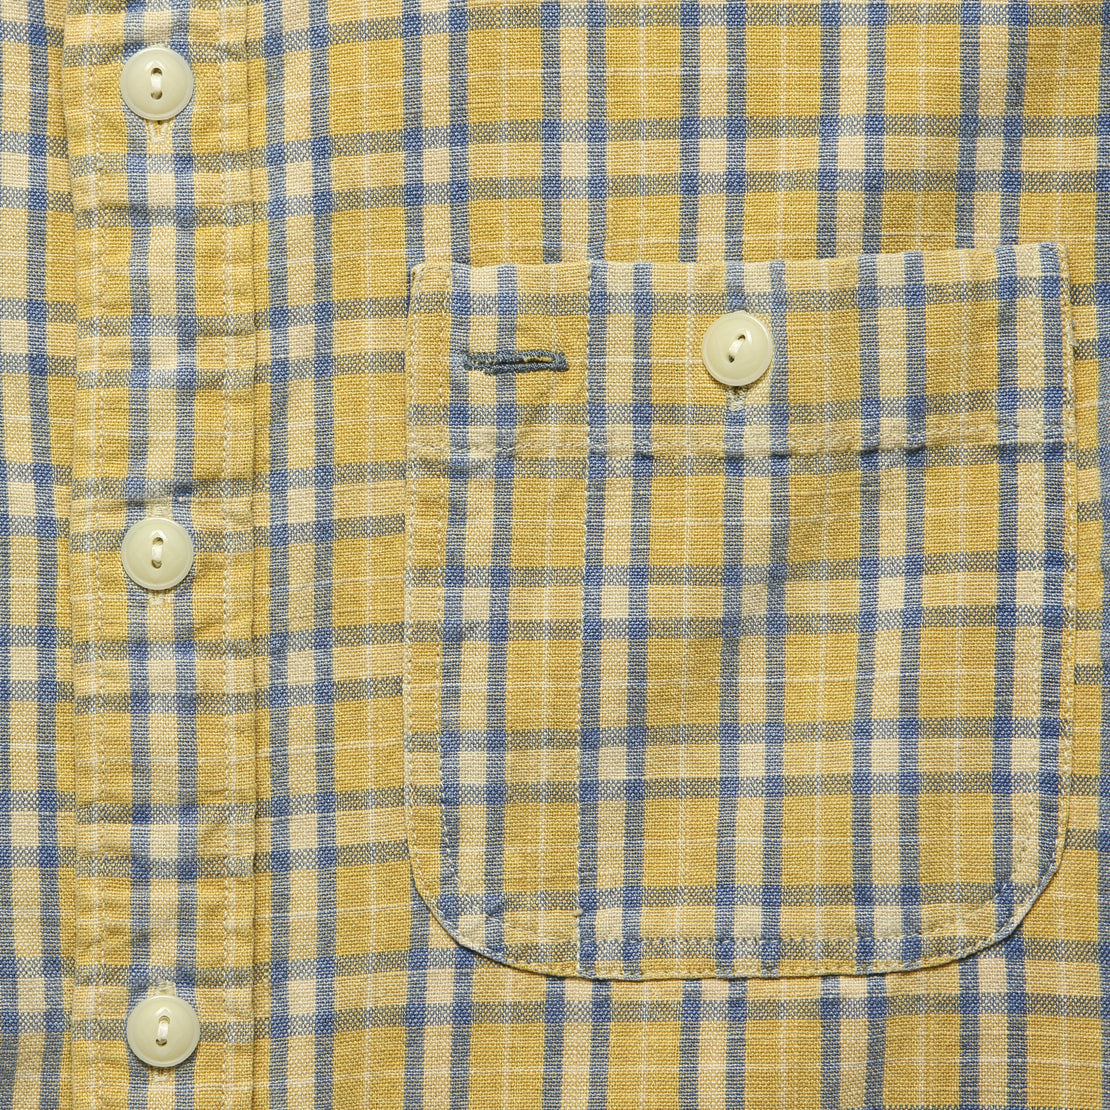 Cody Workshirt - Yellow/Indigo - RRL - STAG Provisions - Tops - L/S Woven - Plaid